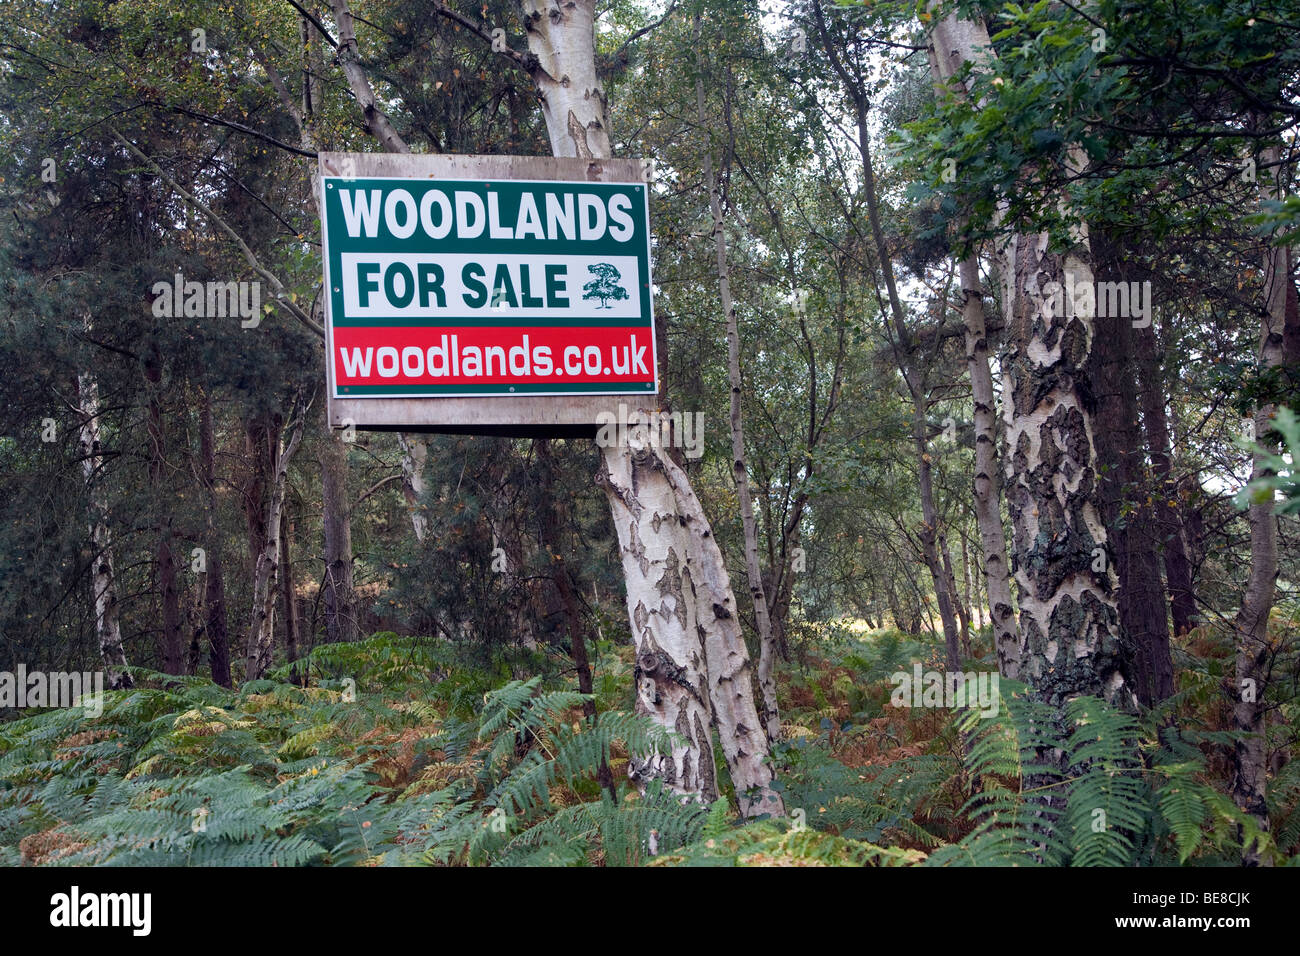  Woodlands for sale in the UK